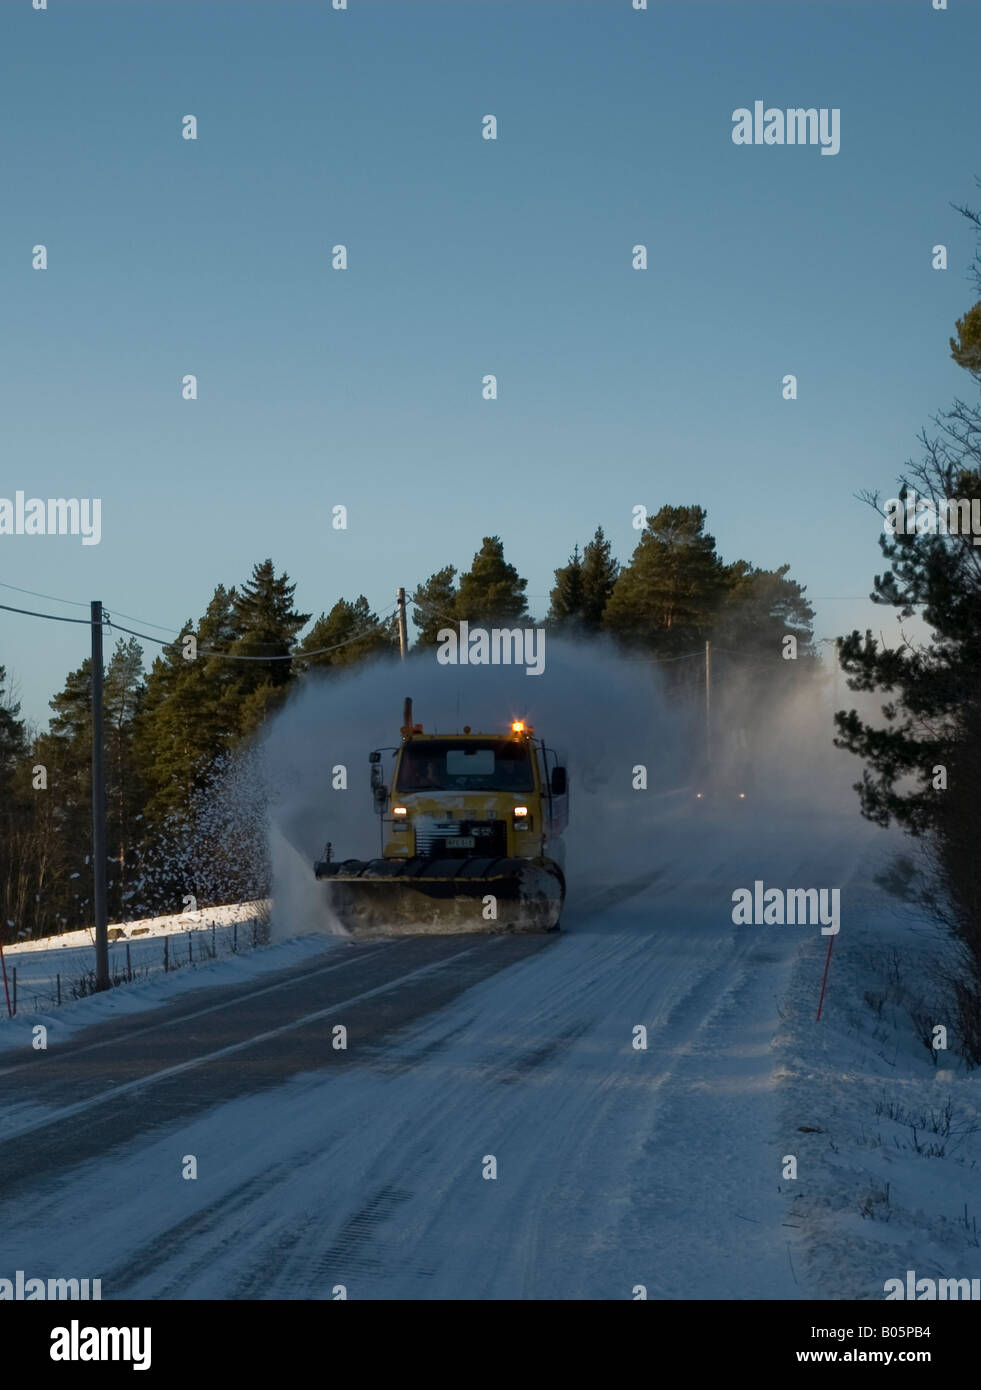 A snow plow keeping the roads clean Stock Photo